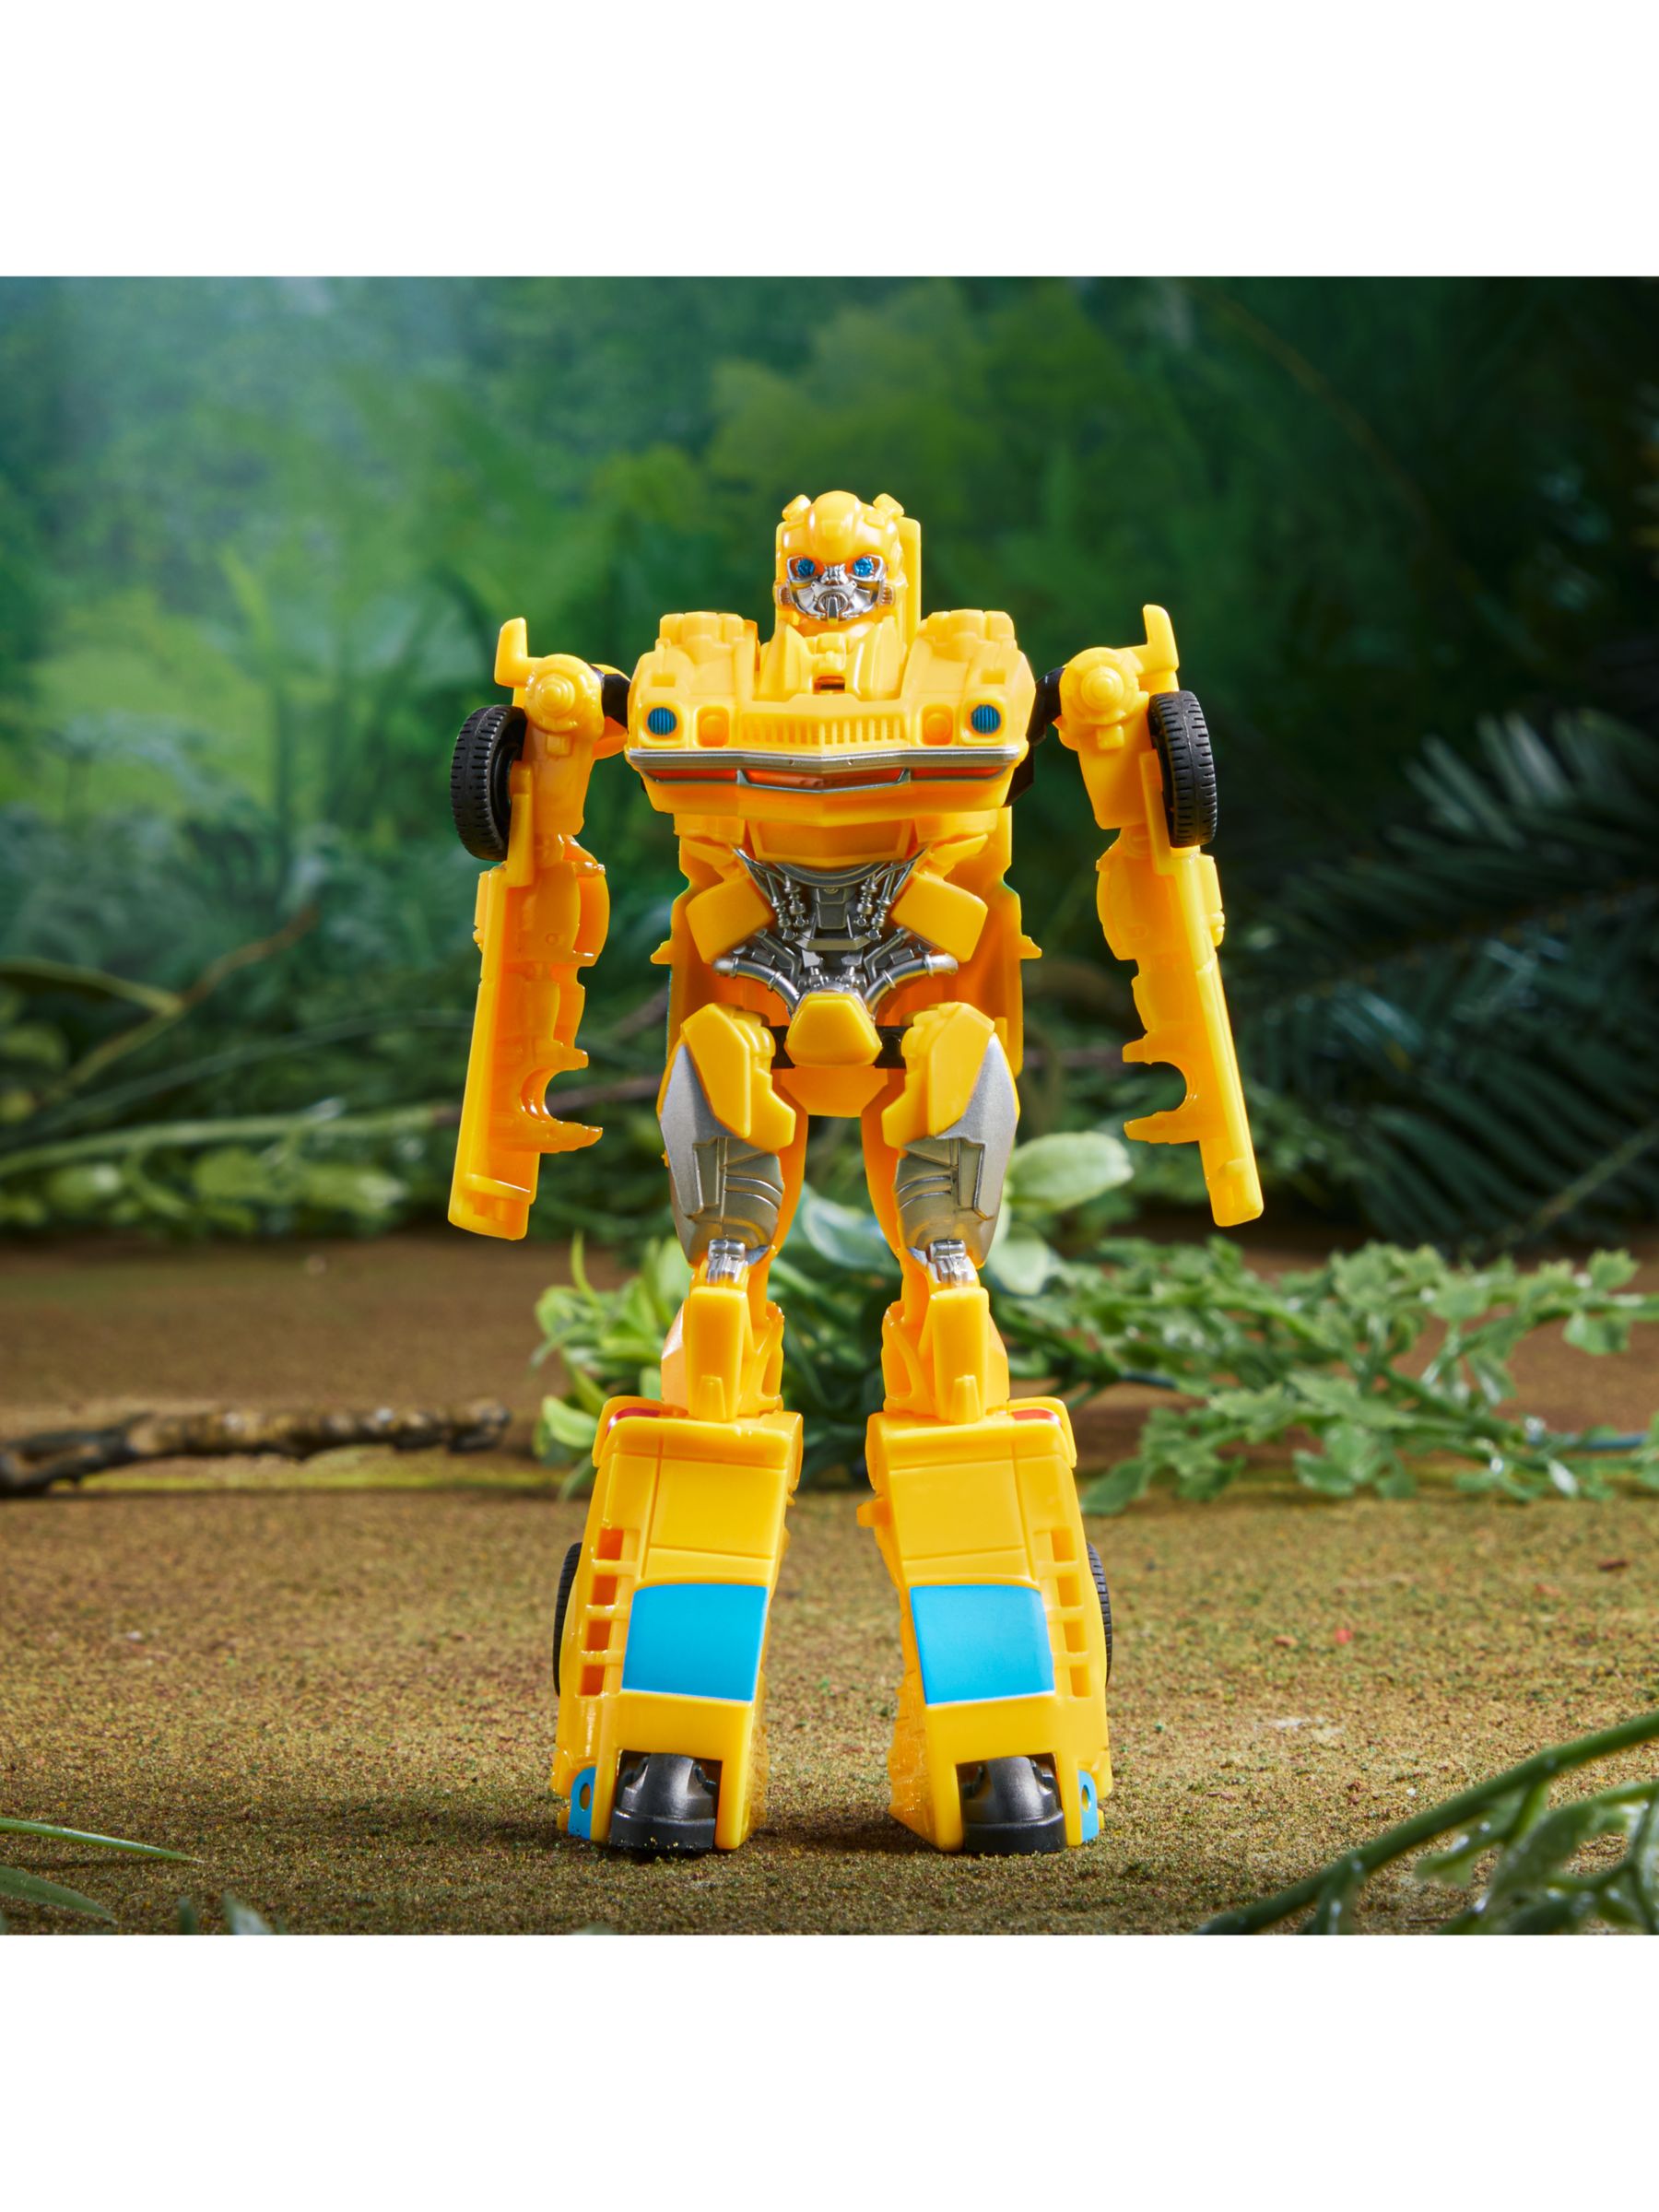 The Transformers character 'Ultimate Bumblebee' stands on display